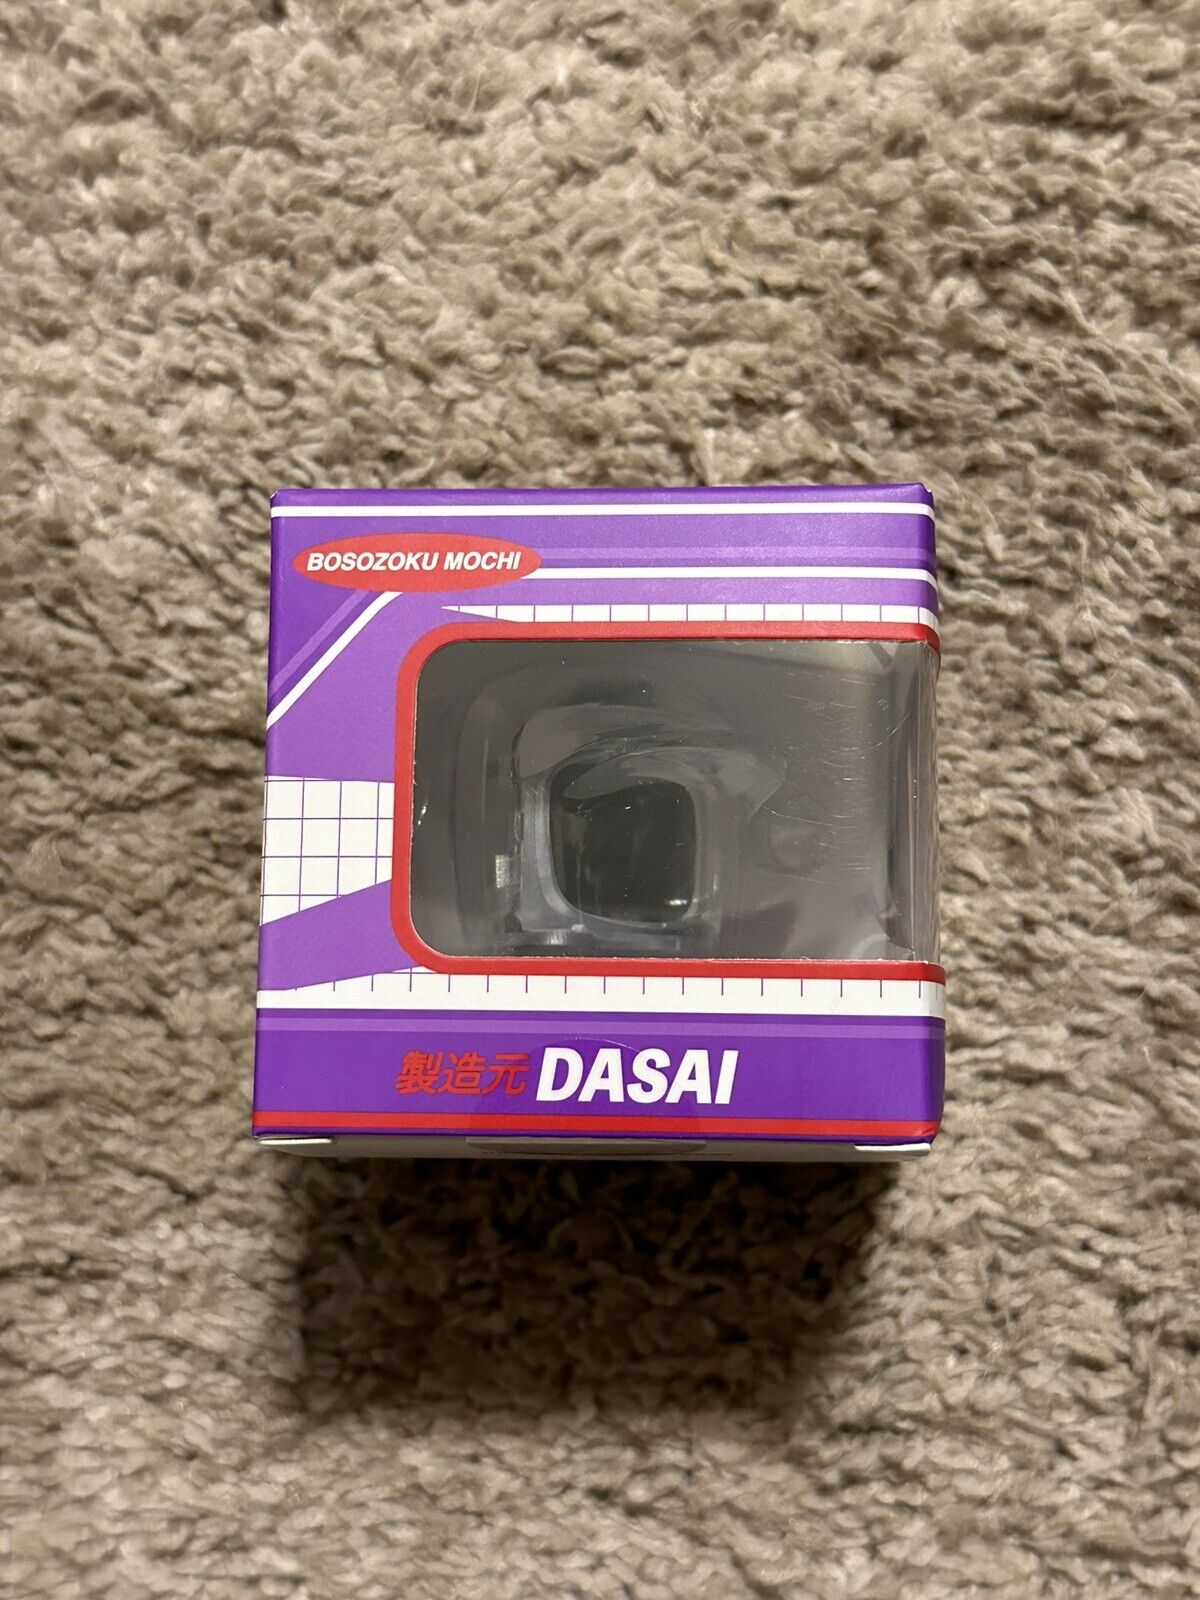 Dasai Bosozoku Mochi Gen 2 - Limited Edition - NEW - IN HAND AND SHIPS FAST